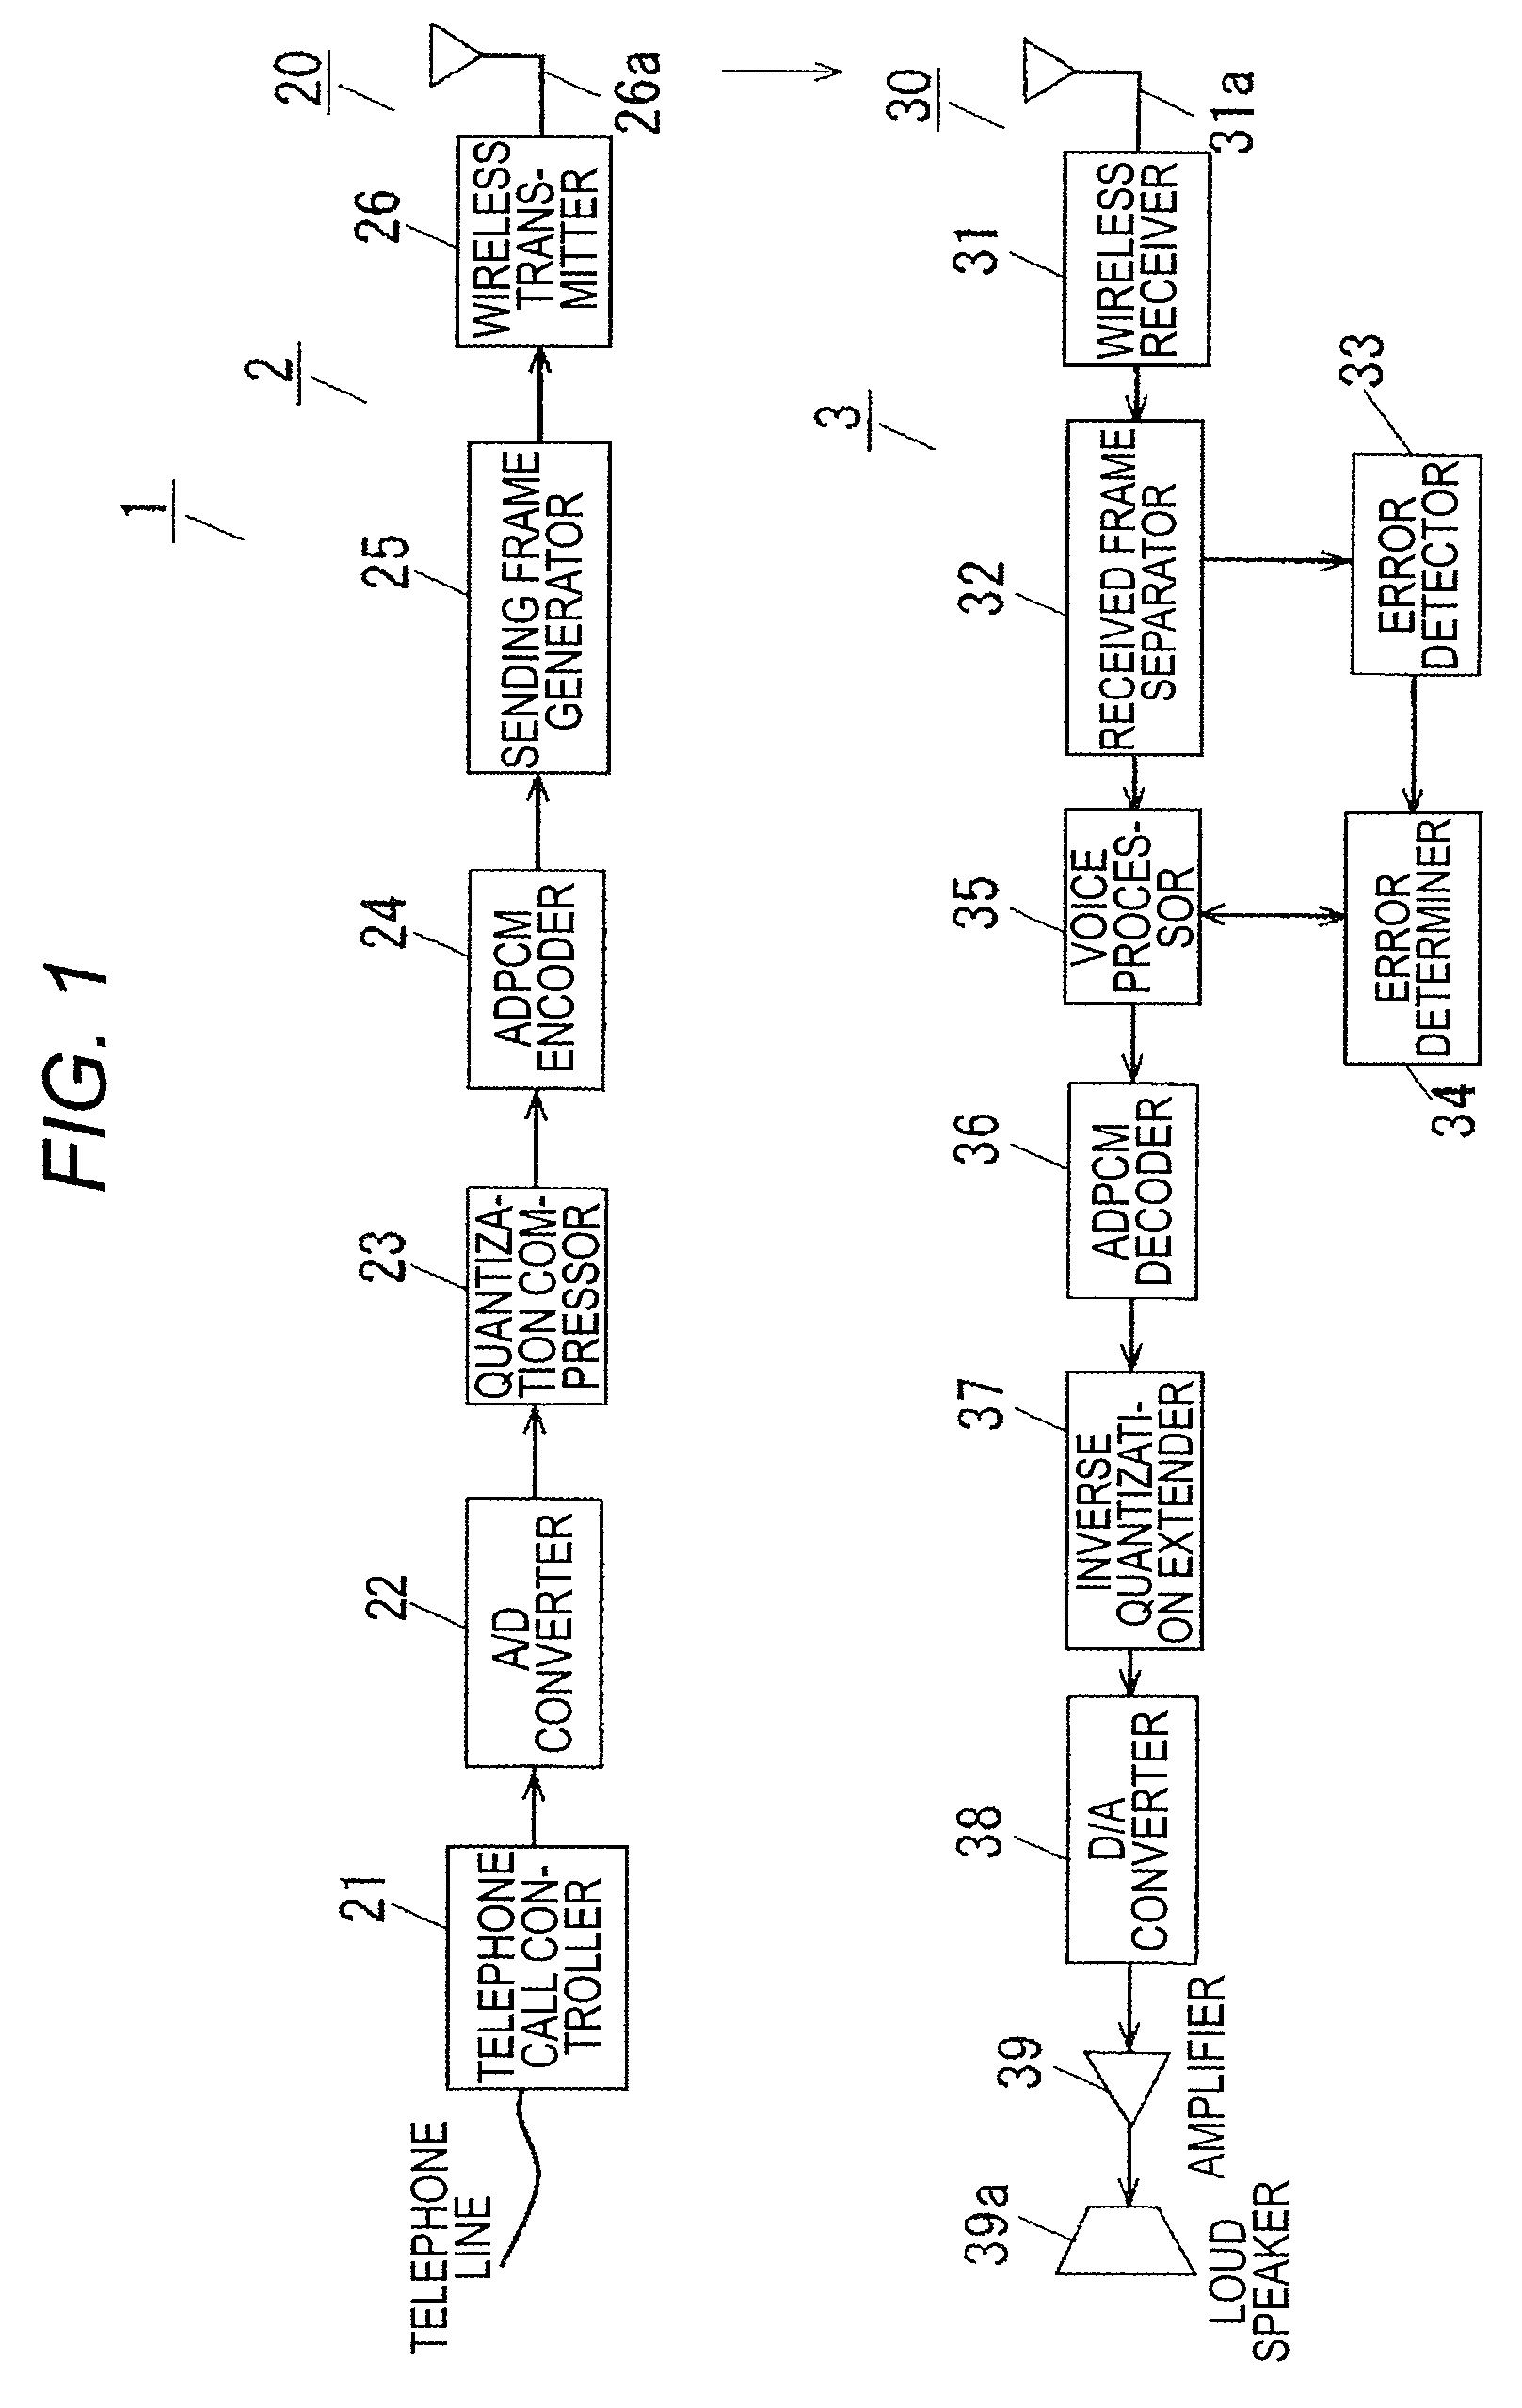 Voice processing apparatus and method for detecting and correcting errors in voice data